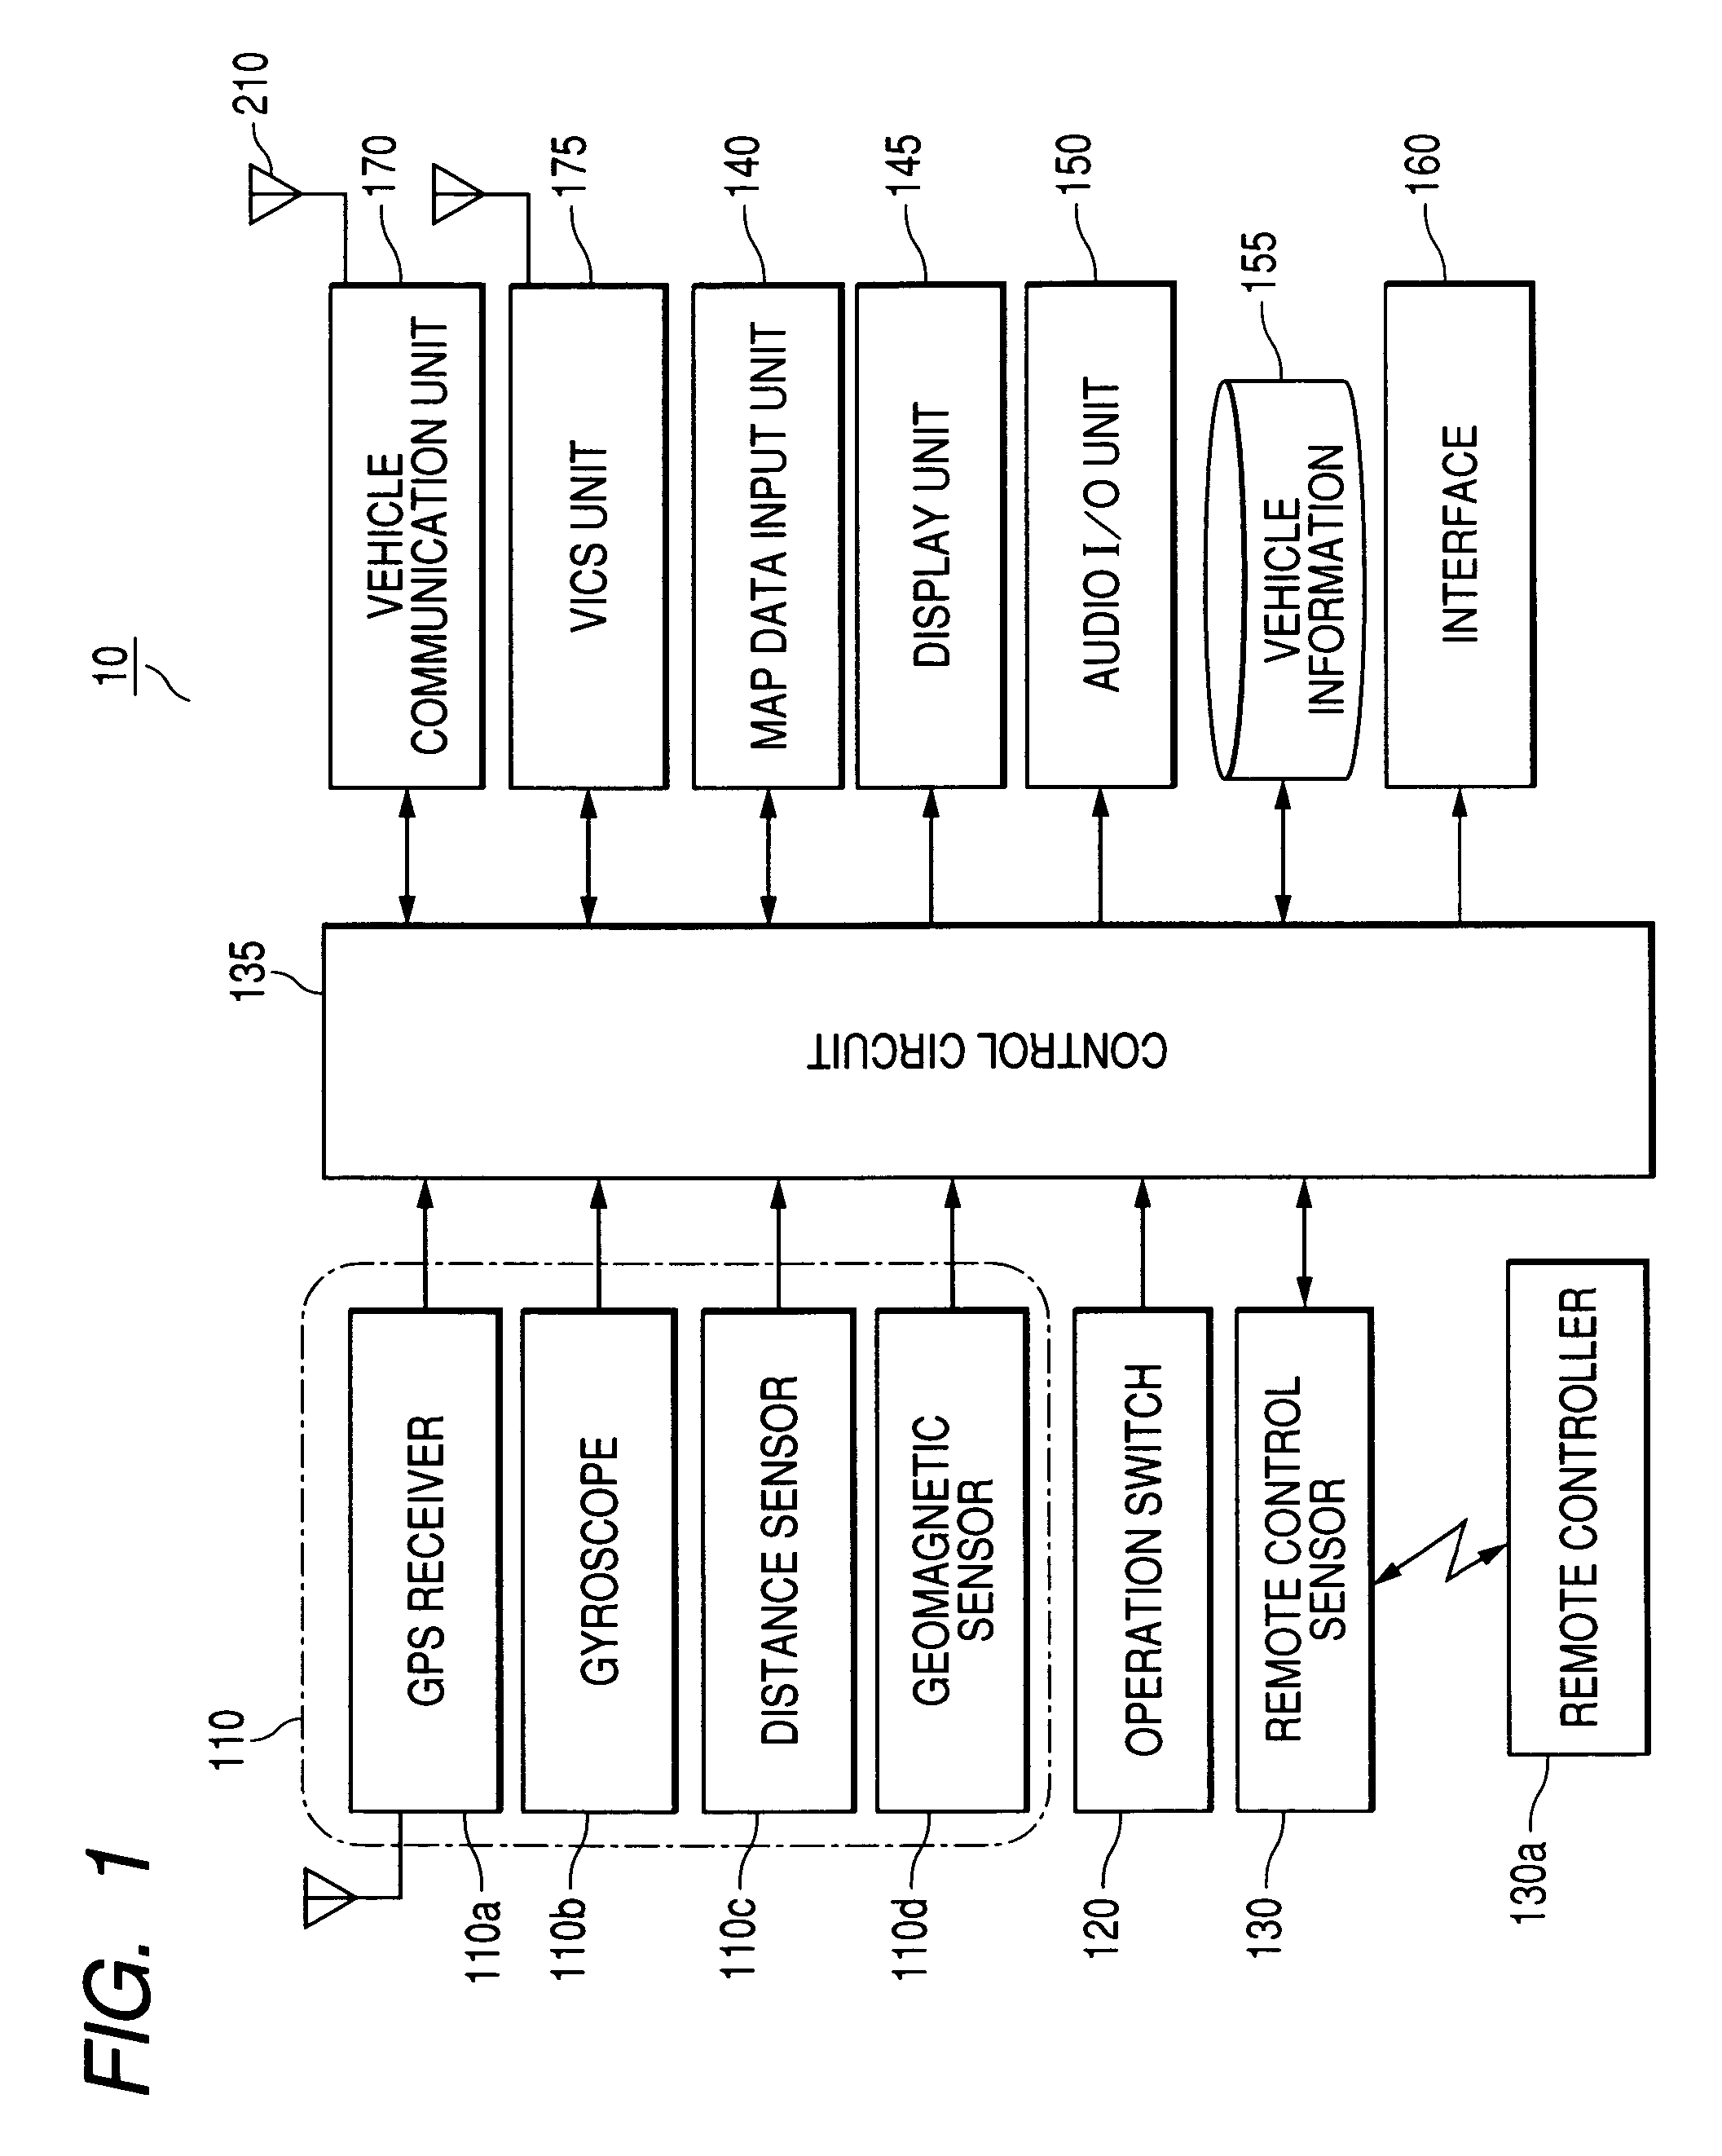 Vehicle communication apparatus and system for supporting vehicles passing through narrow road